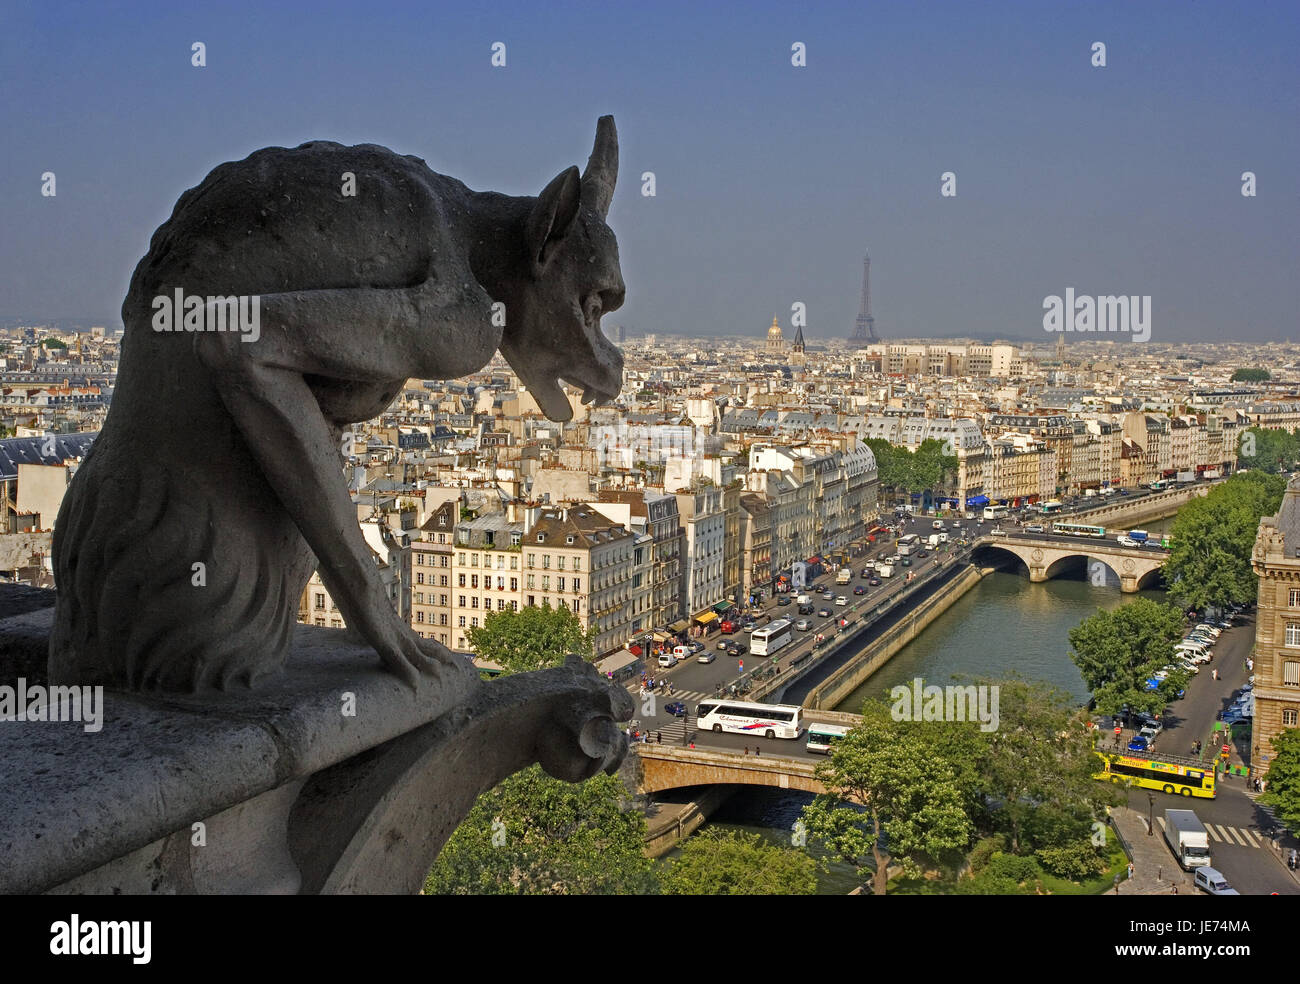 France, Paris, cathedral Notre lady, detail, defensive wall projection, sculpture, capital, church, structure, Gothic, sacred construction, Notre lady's cathedral, roof, roof bleed, gargoyle, place of interest, landmark, town overview, Stock Photo